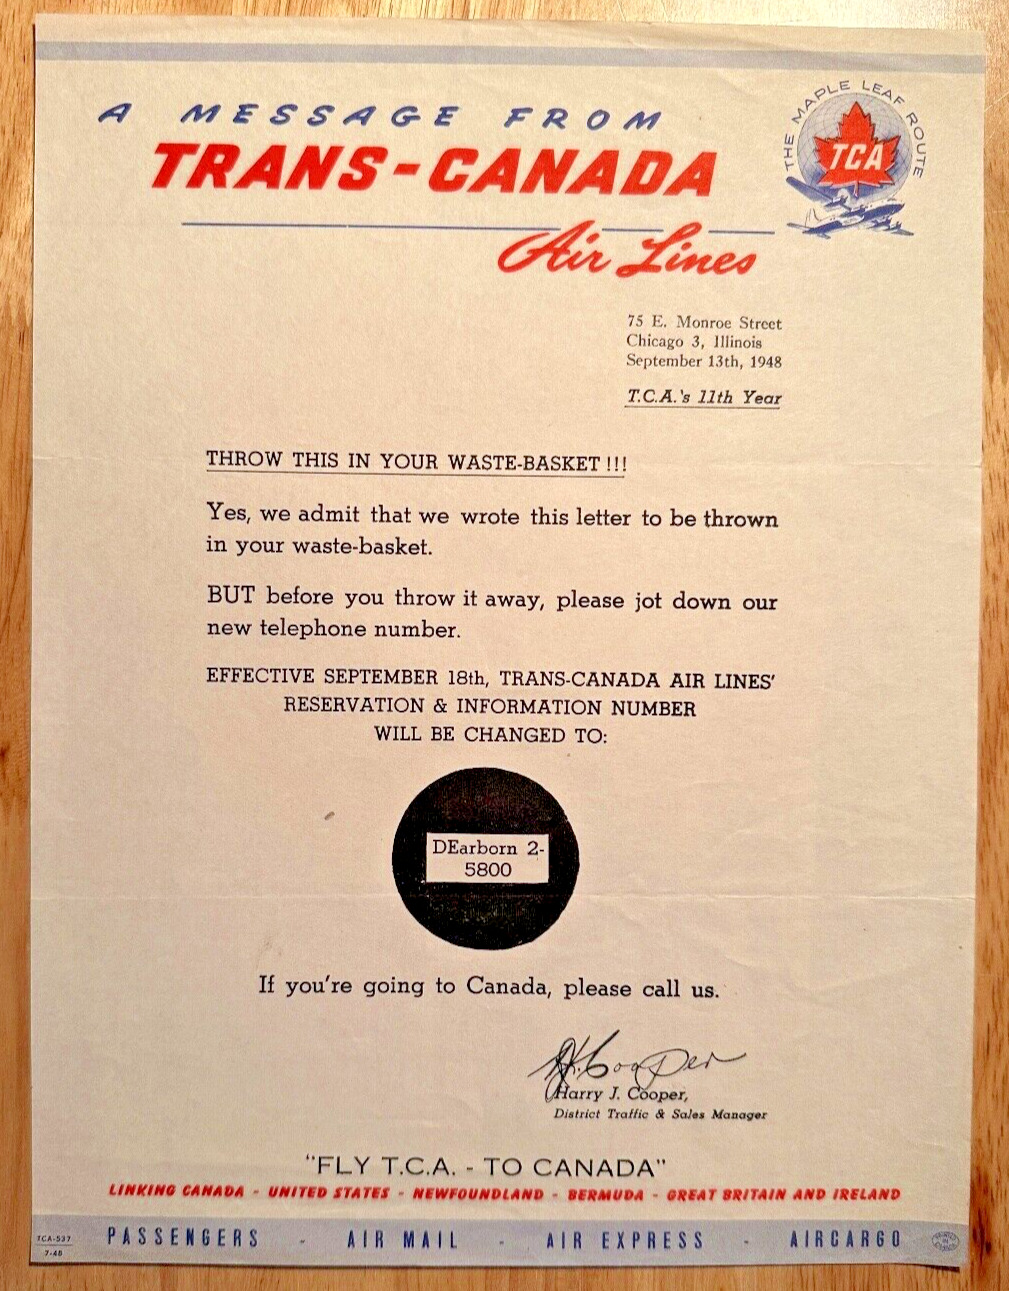 Trans-Canada Air Lines- 1948 Chicago, Illinois vintage business letter